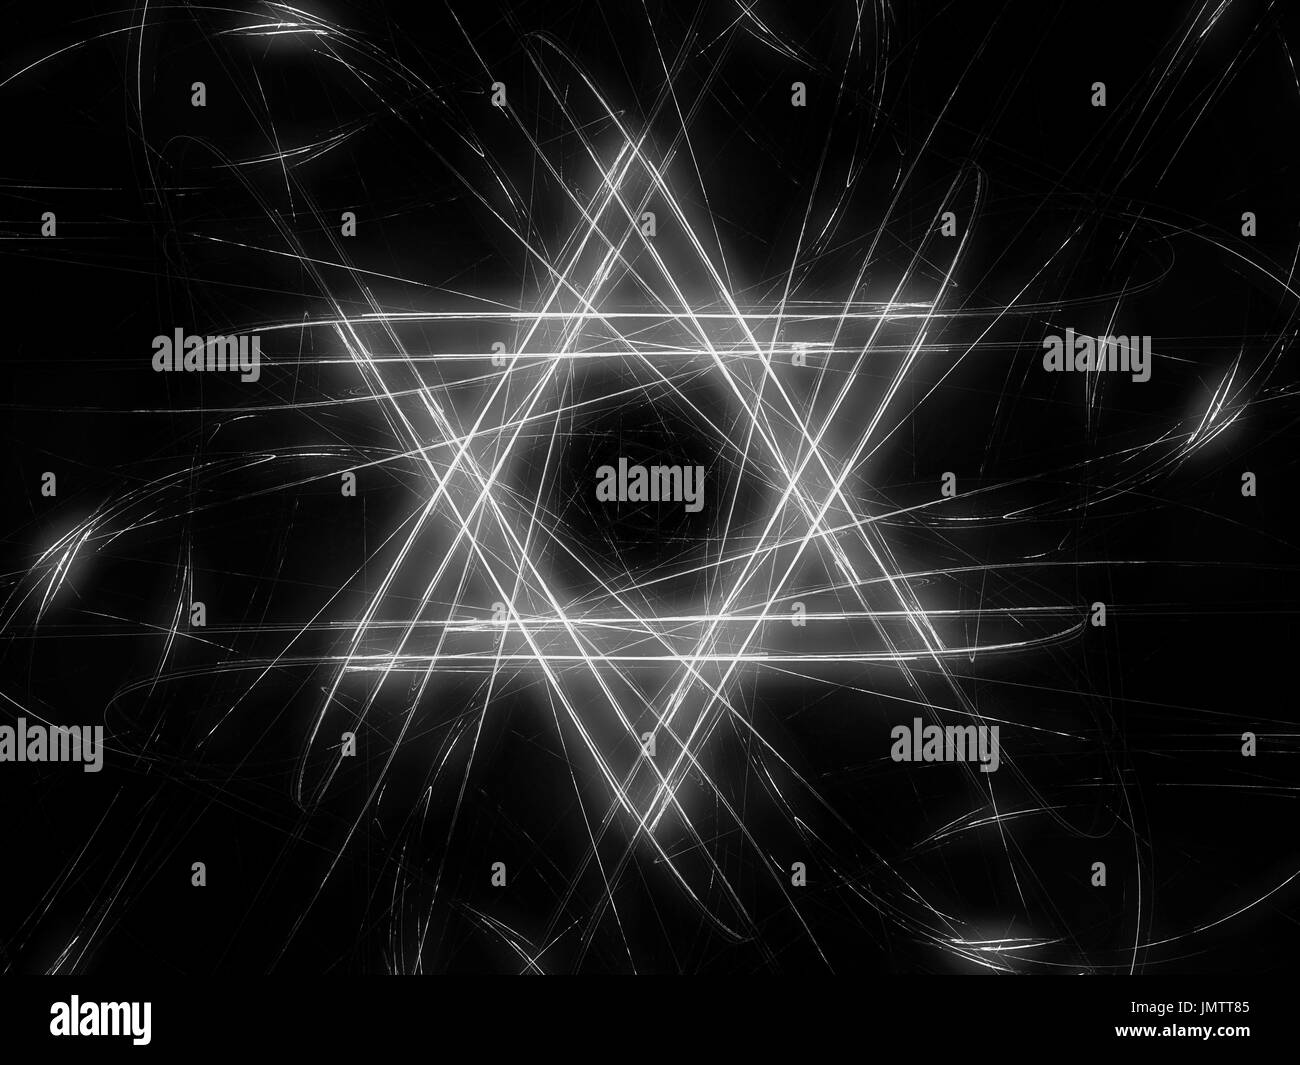 Jewish David star design, abstract fractal background, computer generated, black and white, 3D rendering Stock Photo